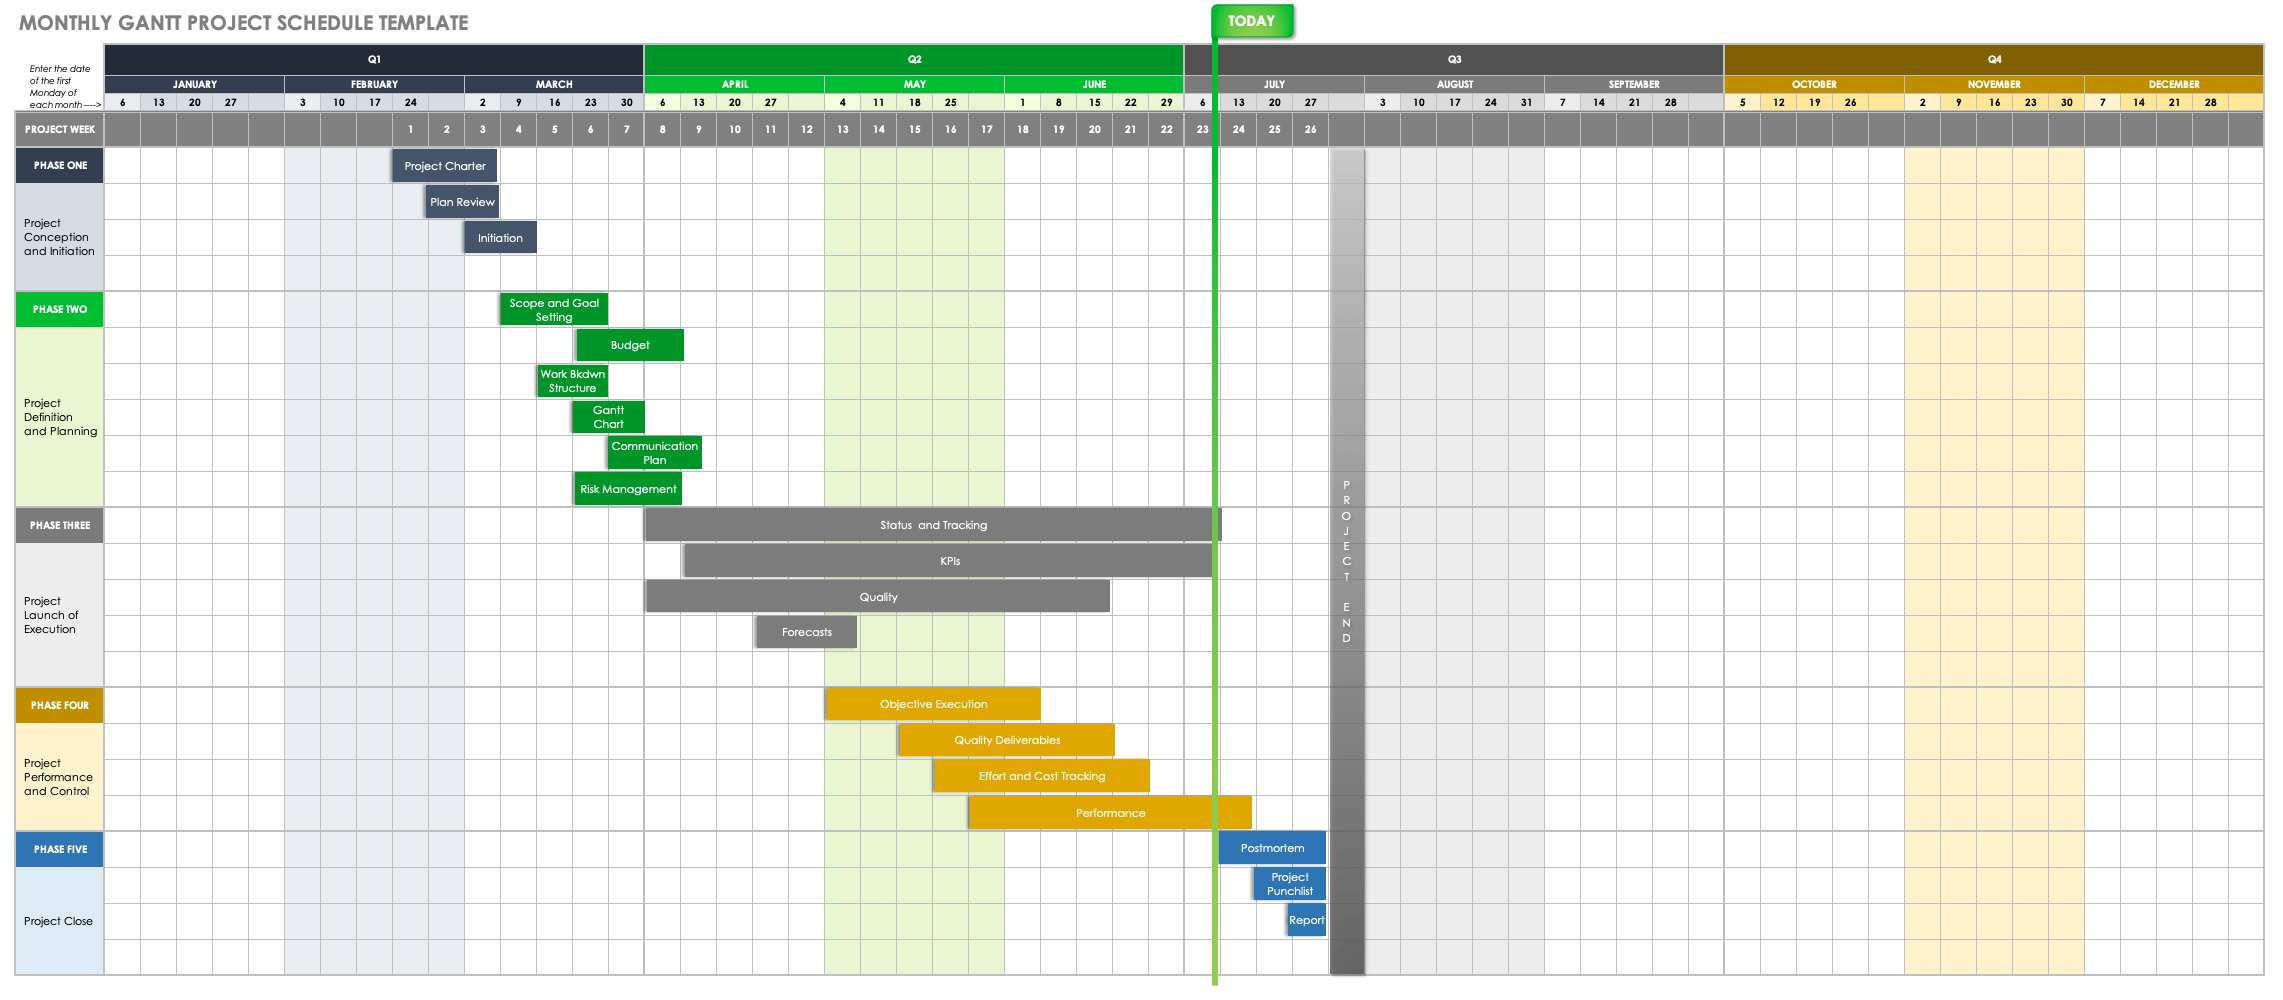 Monthly Gantt Project Schedule Template